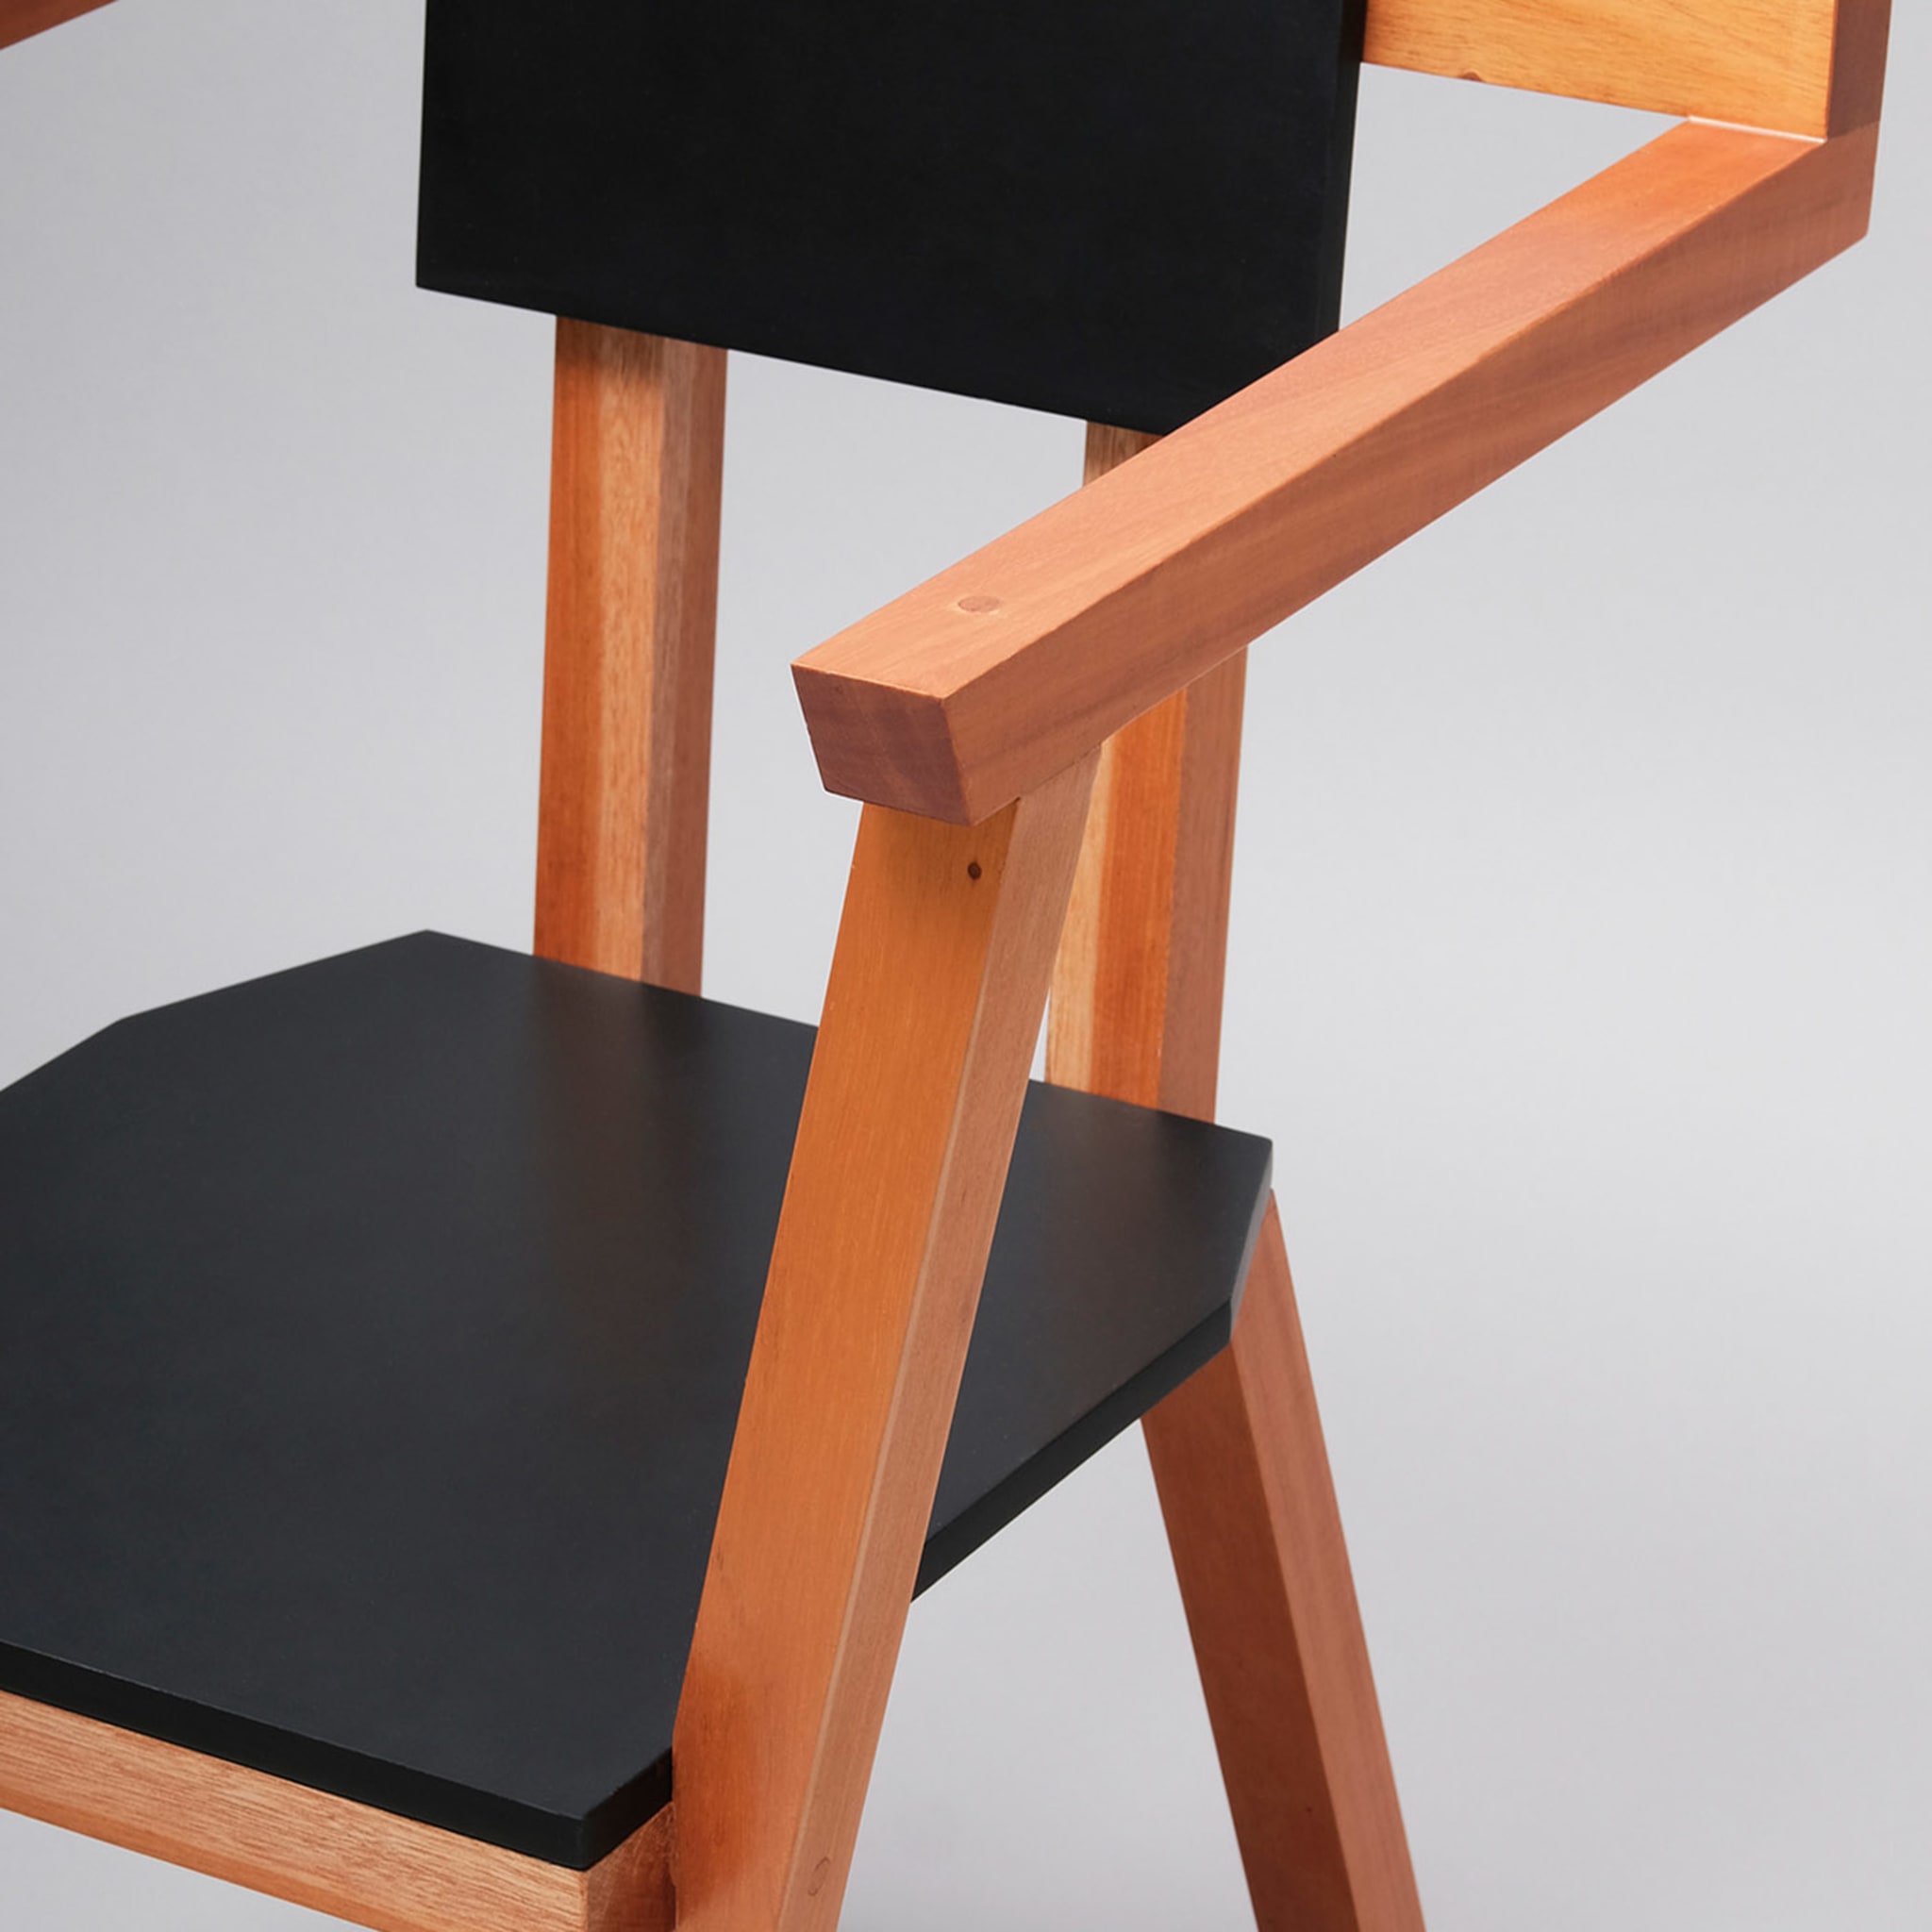 Kaspa Negra Chair With Arms By Clemence Seilles - Alternative view 1